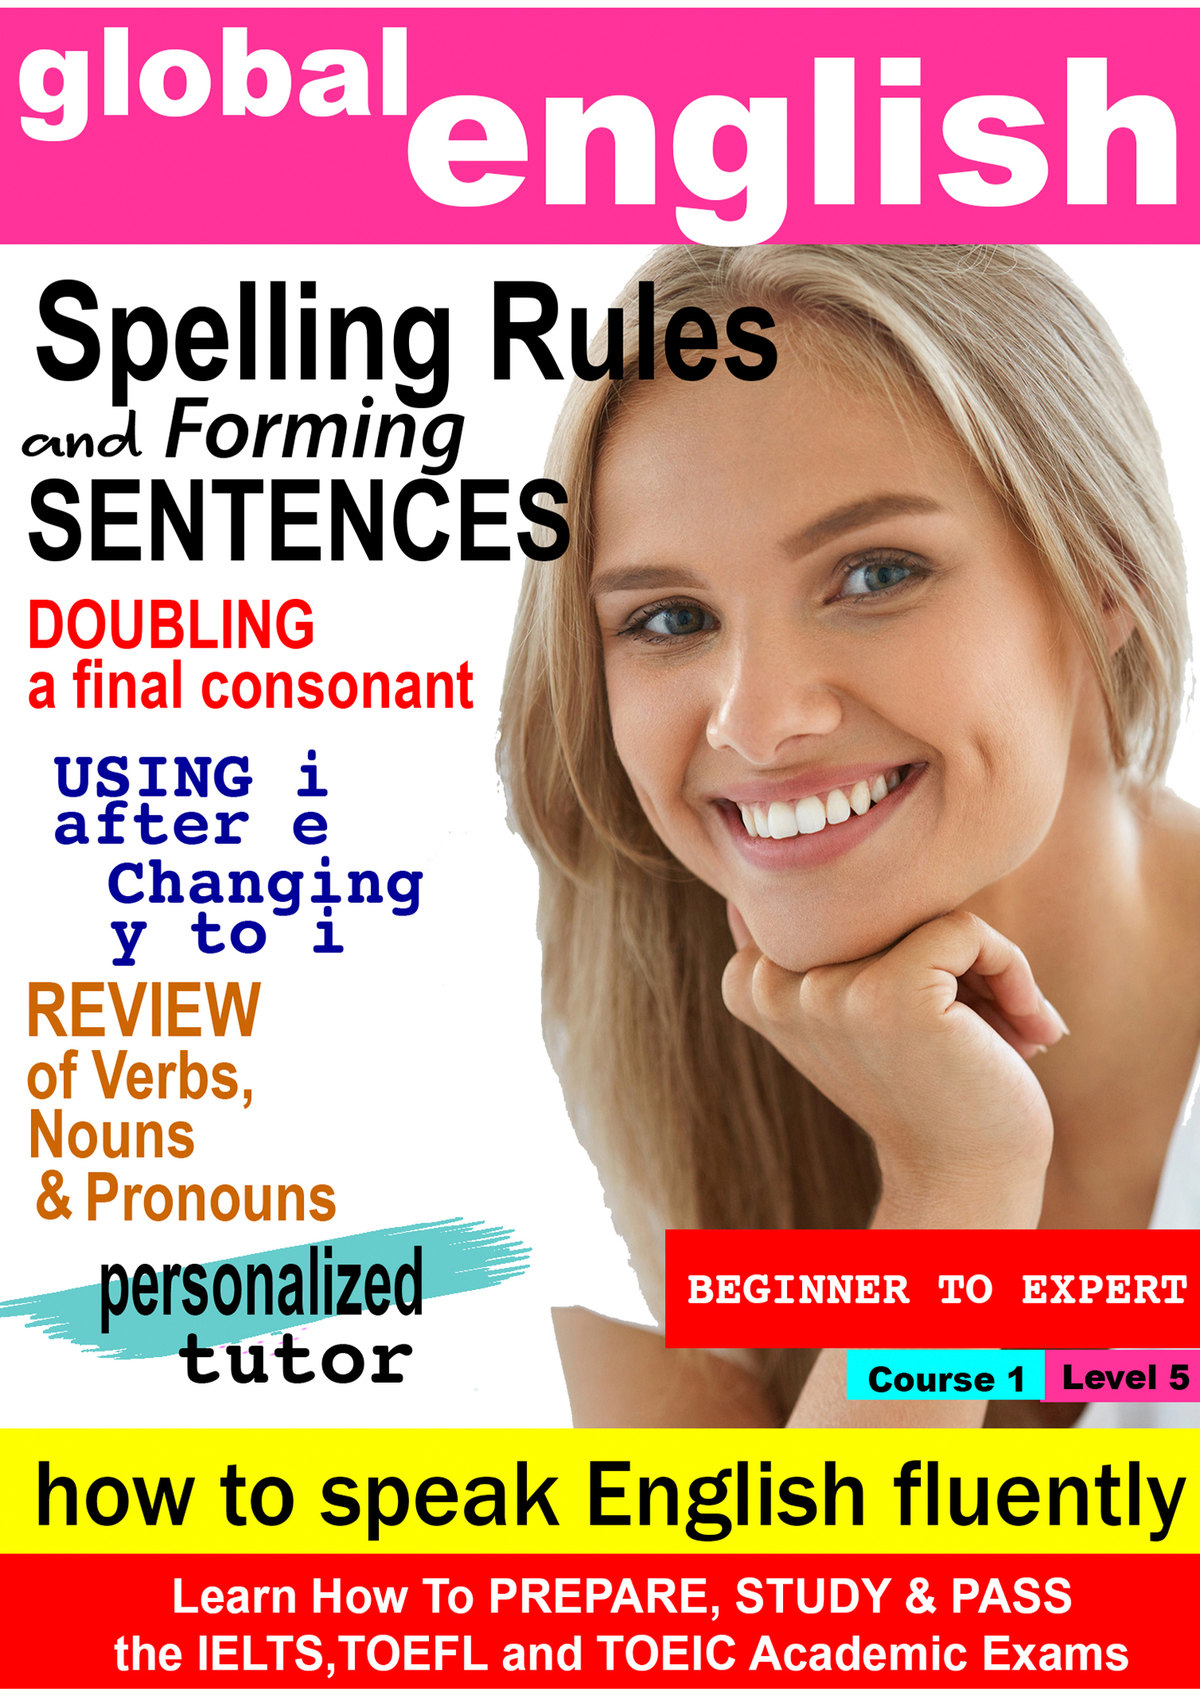 K7005 - Spelling Rules, Review of Verbs, Nouns, Pronouns, Upper/lower case, Identifiers, Present simple & continous tense, Vowels & Consonants, Prepositions of Place, Forming Sentences